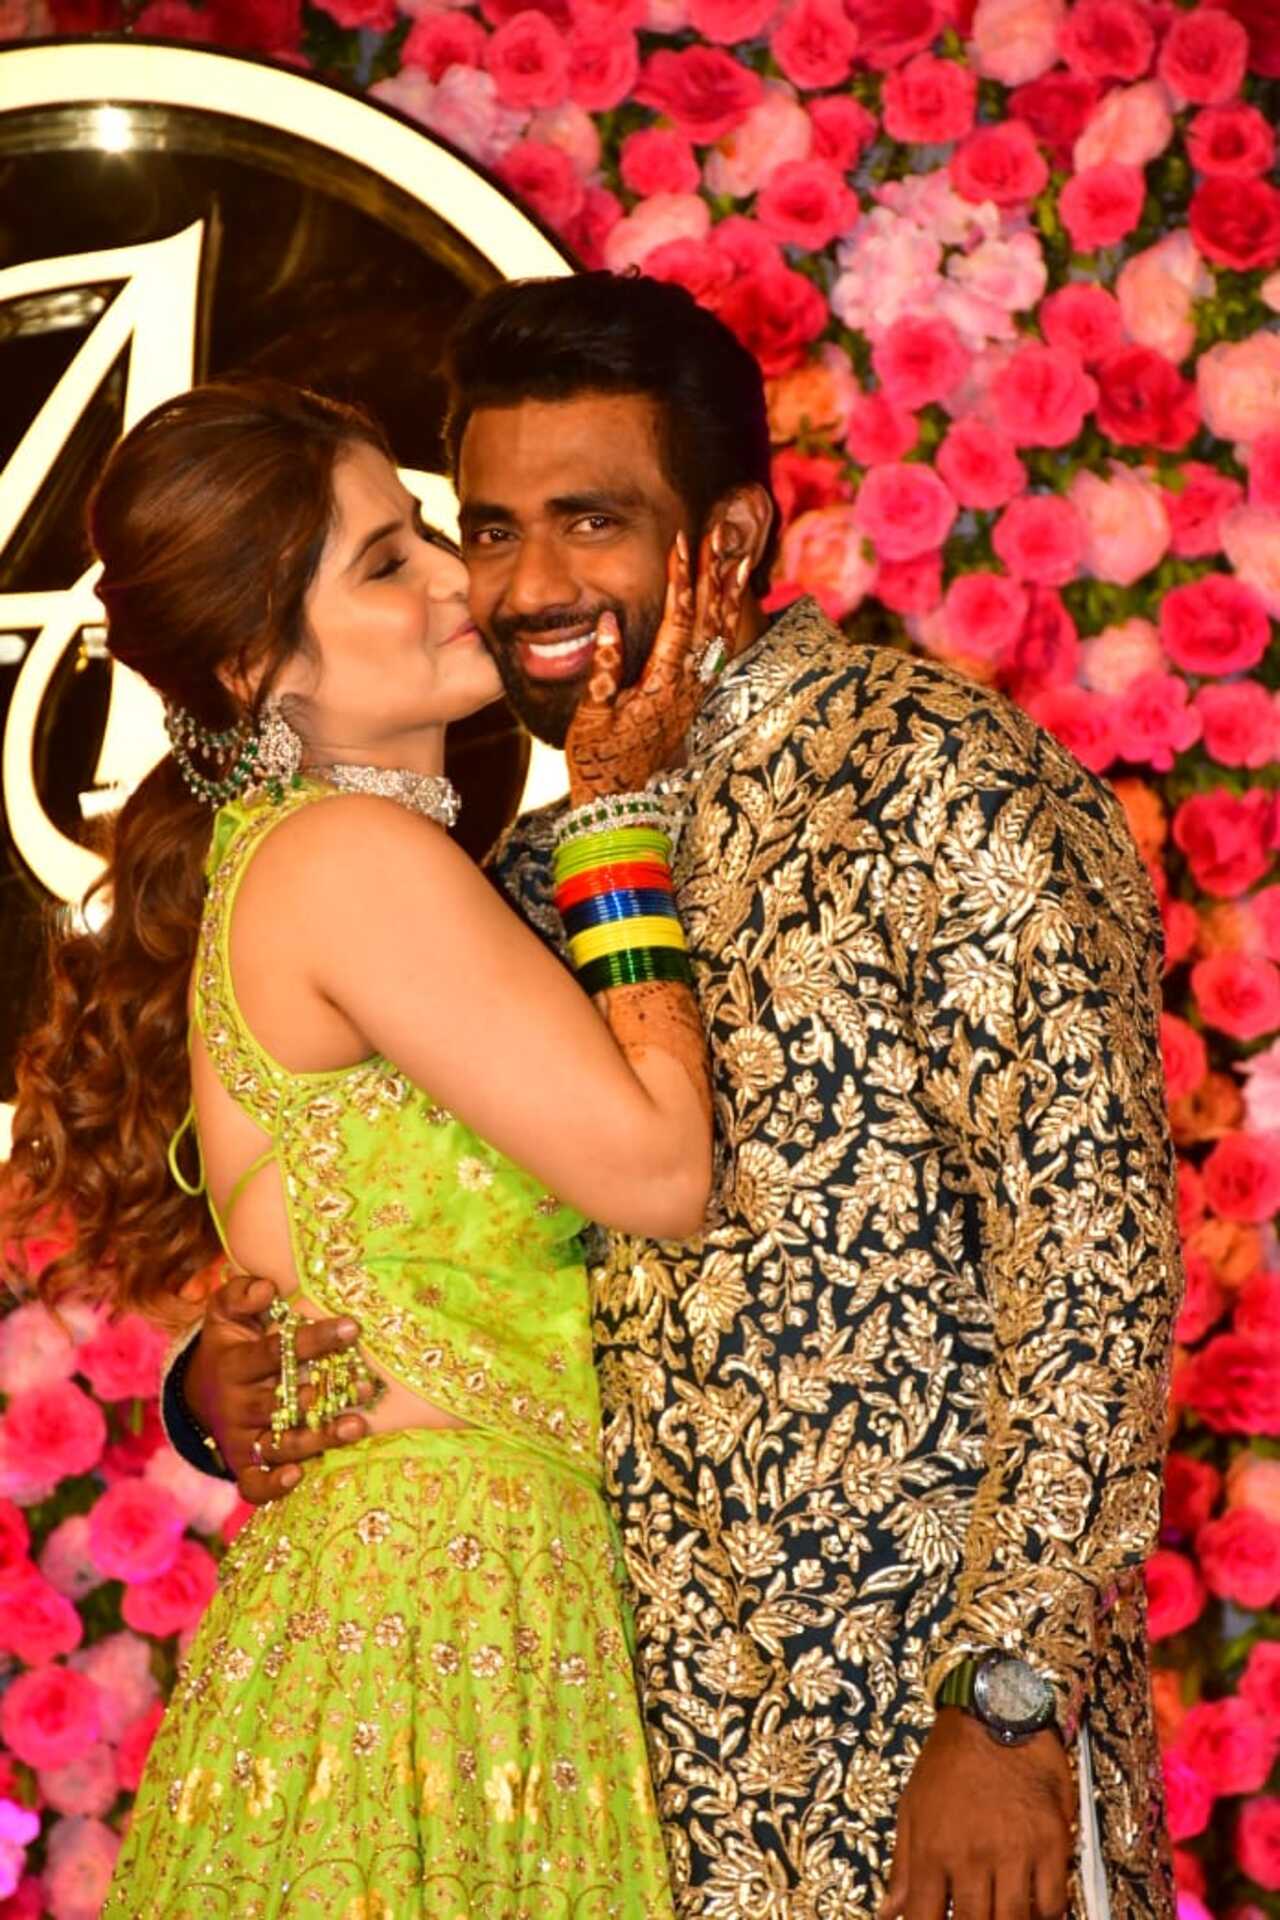 Arti will tie the knot with fiance Dipak Chauhan on April 25. As per reports, it is an arranged marriage. For the sangeet and mehndi, she wore a bespoke lime green lehenga. Dipak wore a black and golden sherwani. 